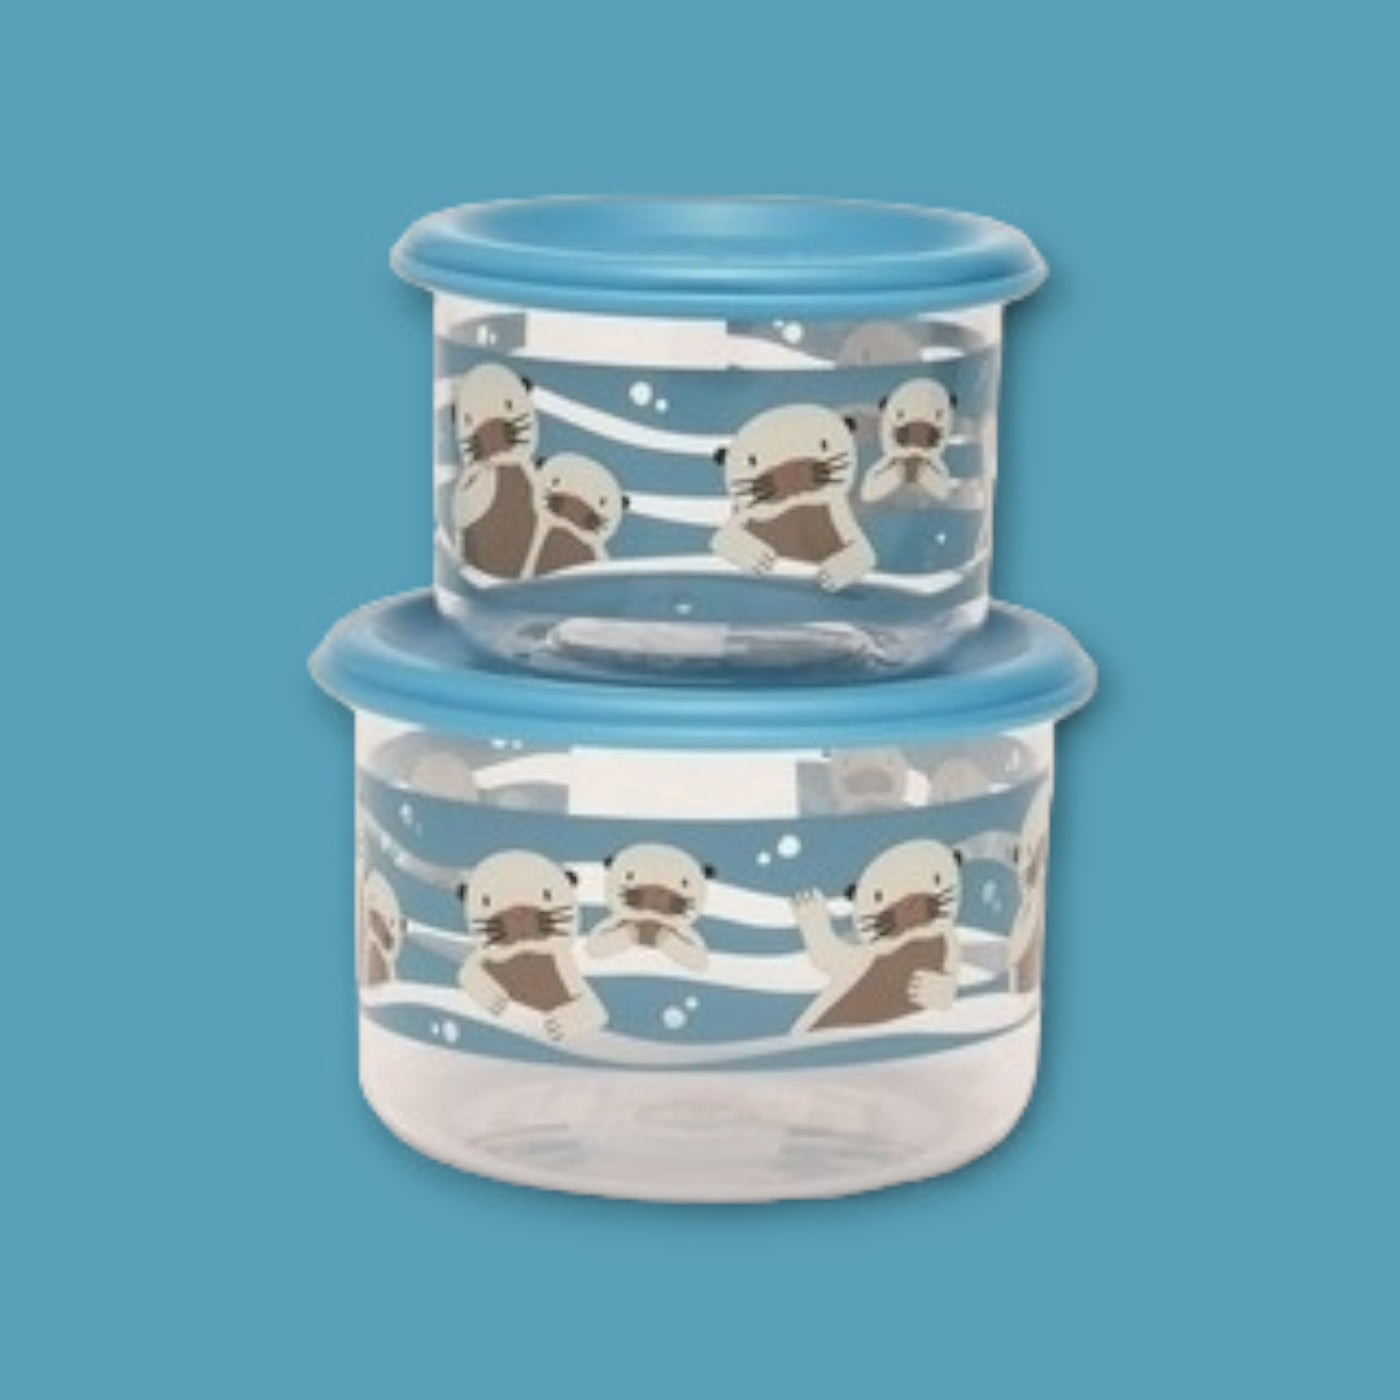 Sugarbooger 2stk Good Lunch Snack Containers